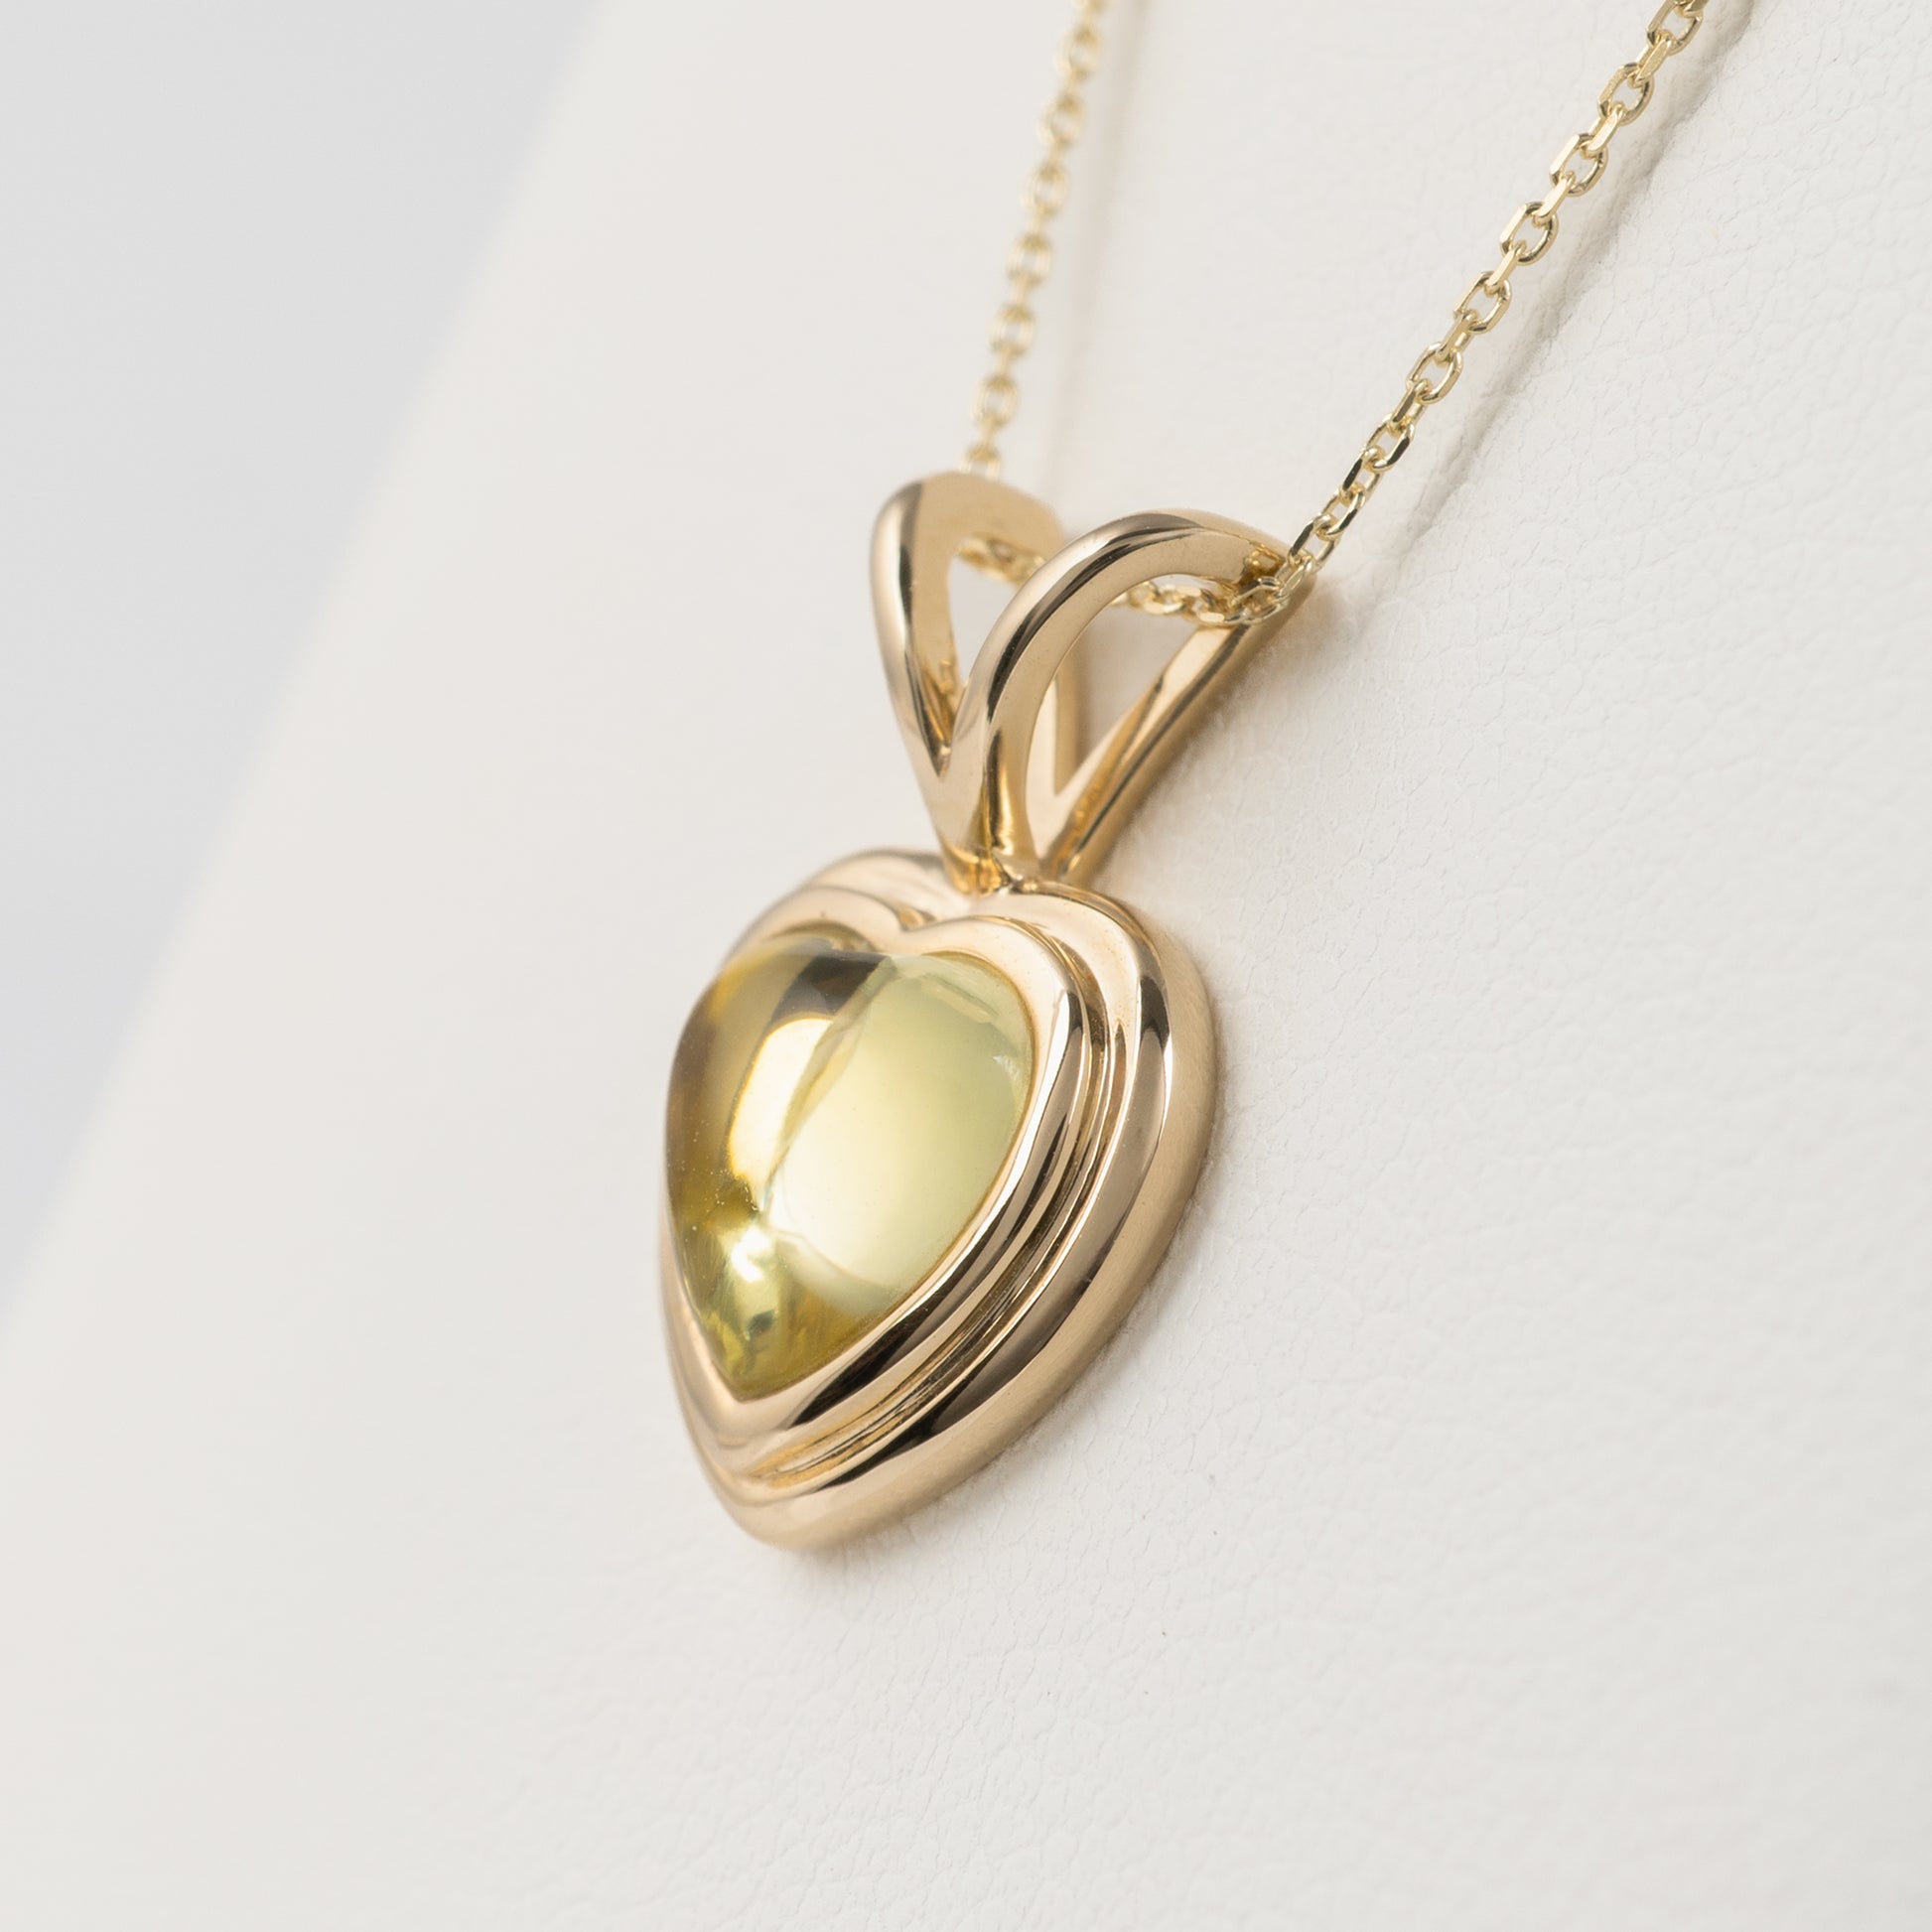 gold heart necklace with olive green gemstone